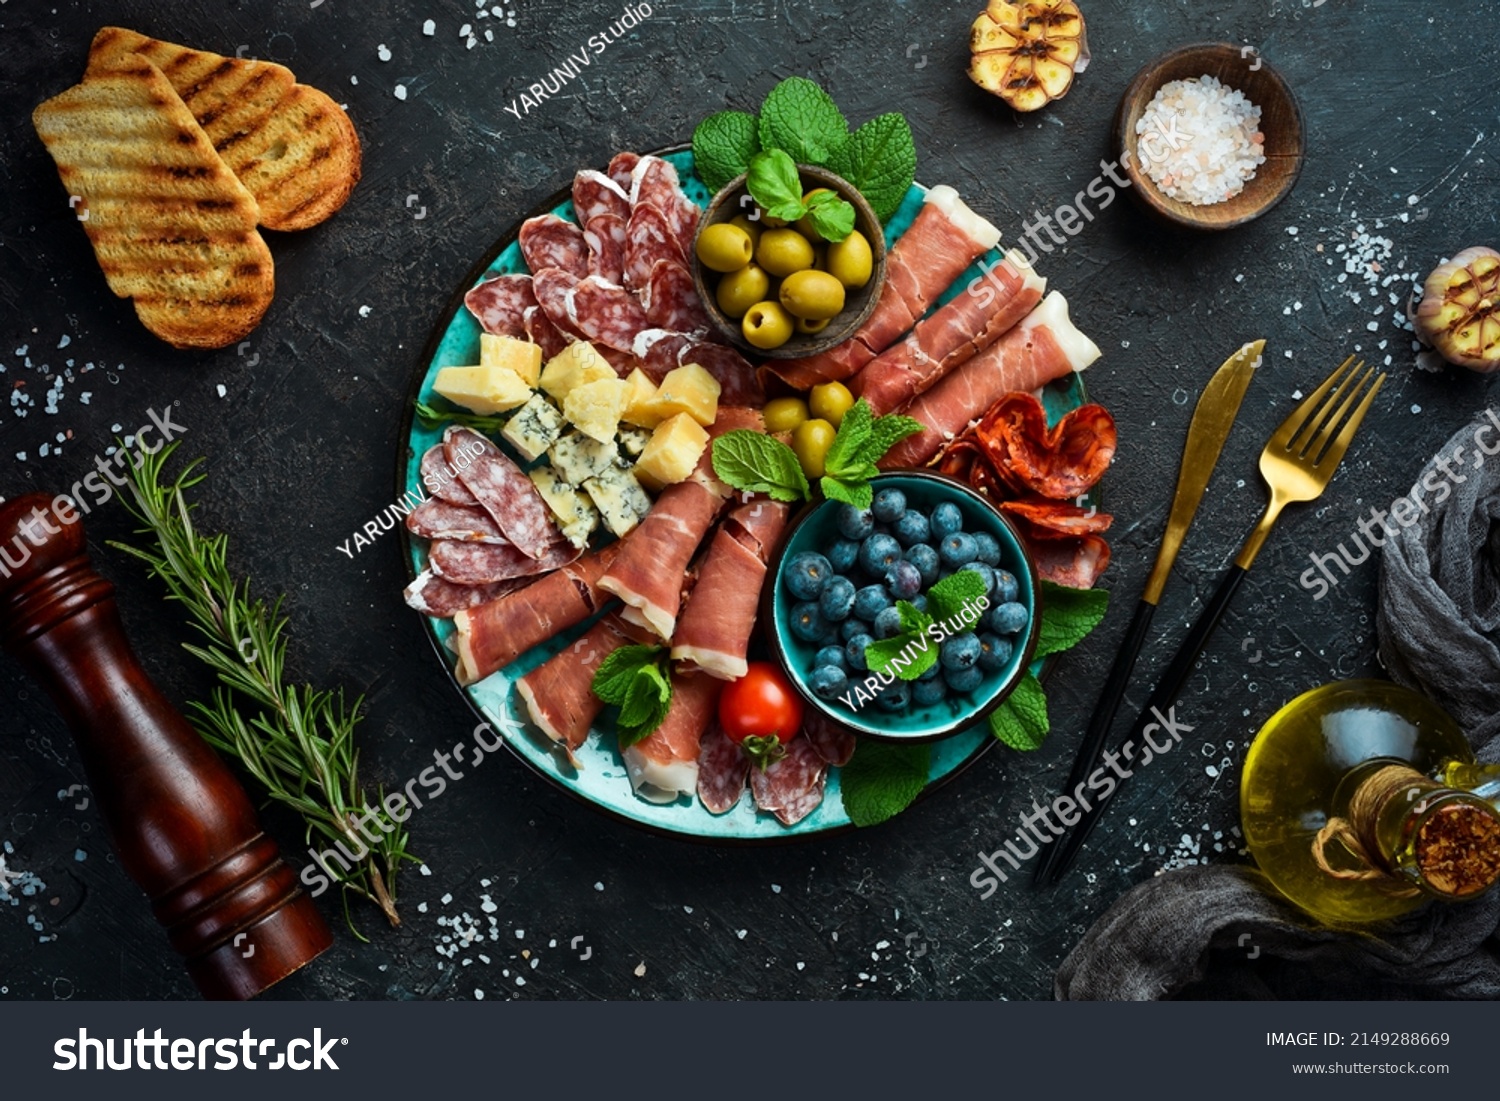 Italian snacks. Plate with cheese and ham, prosciutto, jamon salami, and snacks. On a black stone background. #2149288669